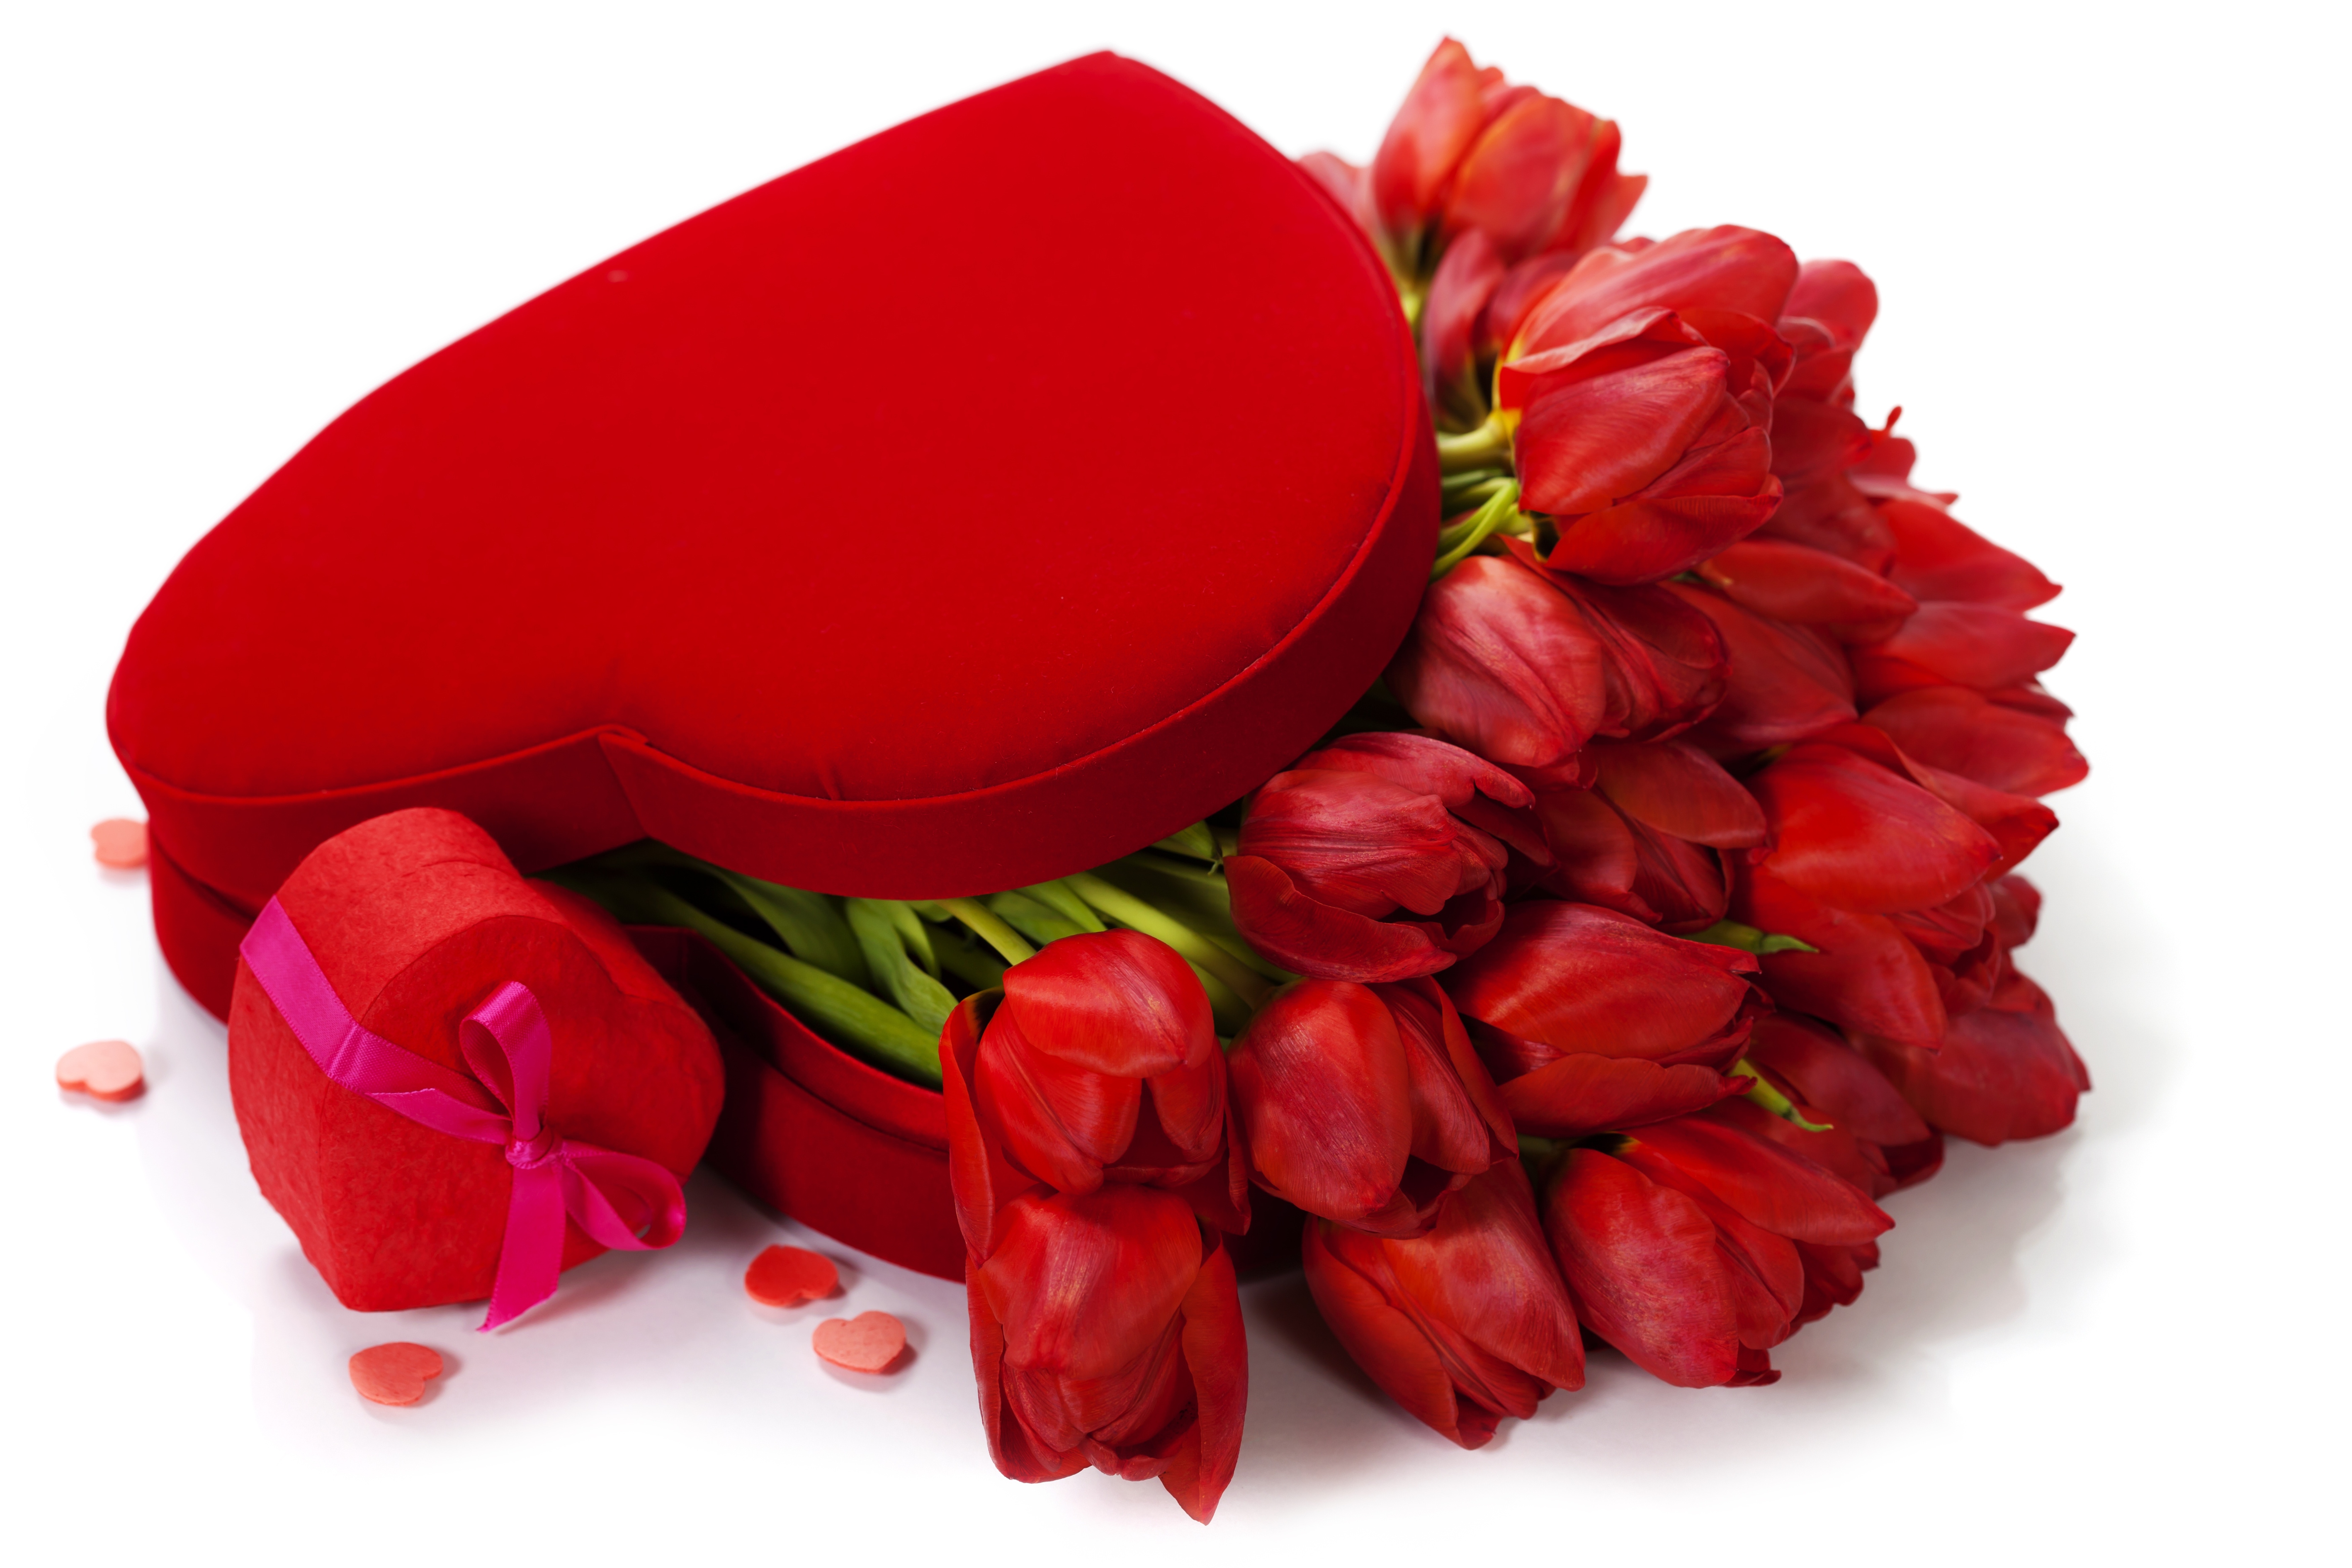 holiday, valentine's day, box, flower, heart, heart shaped, red flower, tulip